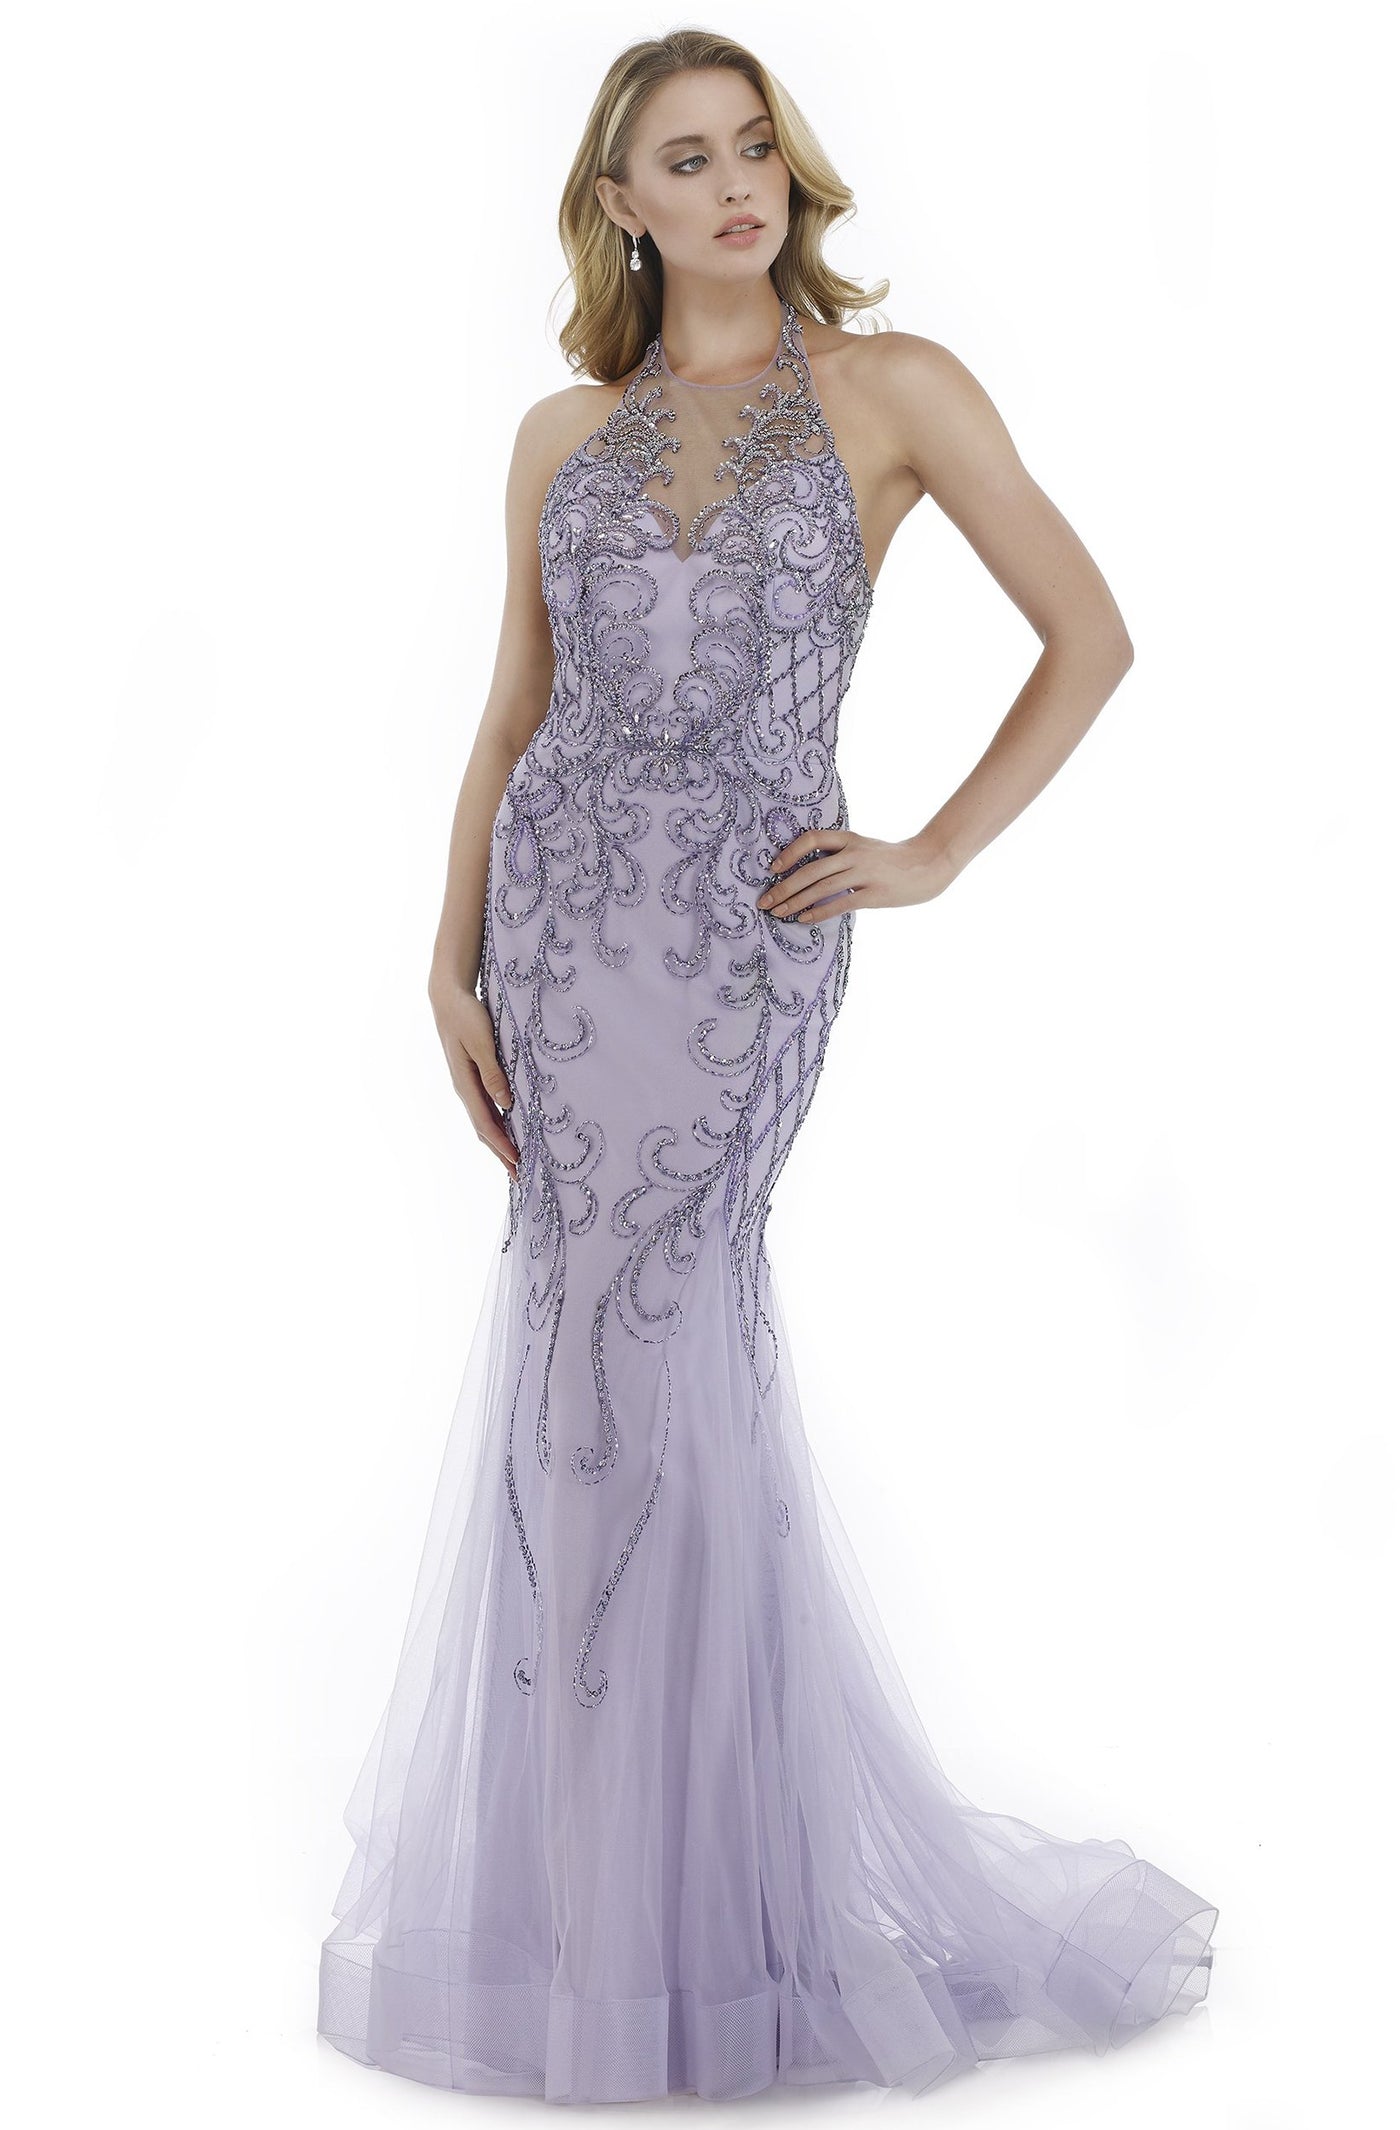 Morrell Maxie - 16003 Illusion Halter Neck Beaded Mermaid Gown in Purple